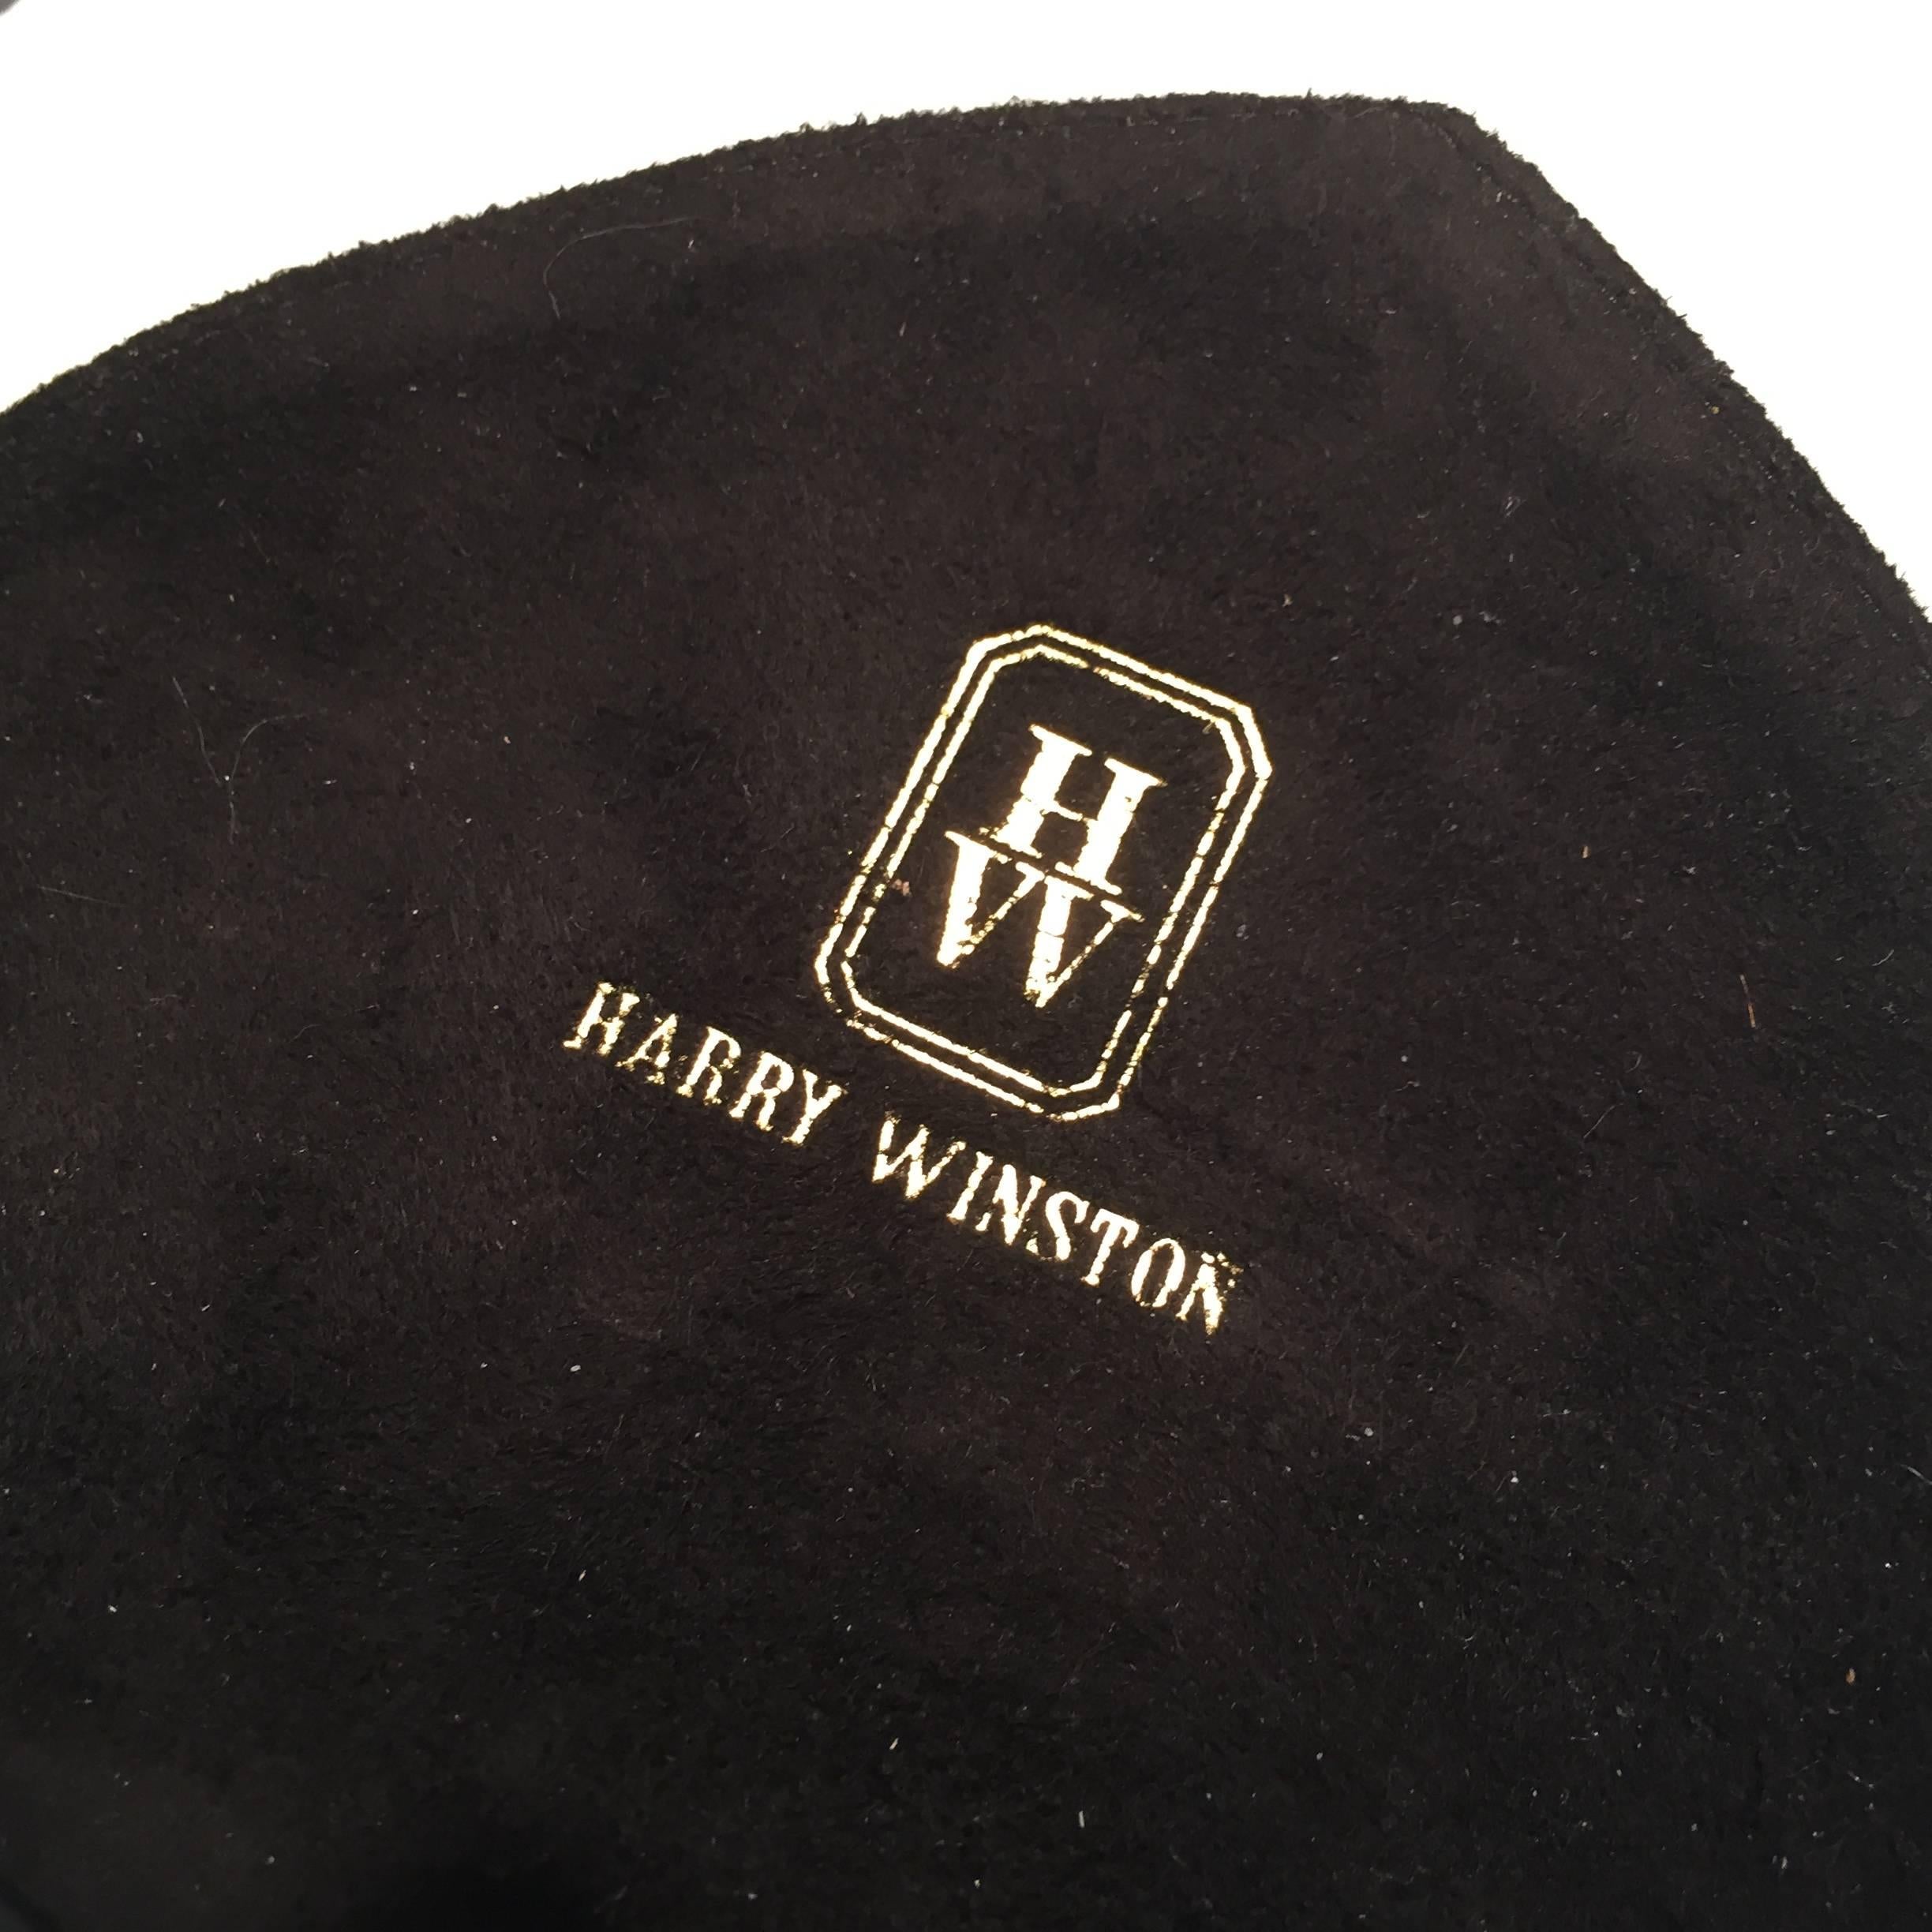 Harry Winston Rare Black and Red Suede Leather Trim Purse/Pocketbook In Excellent Condition For Sale In Westport, CT